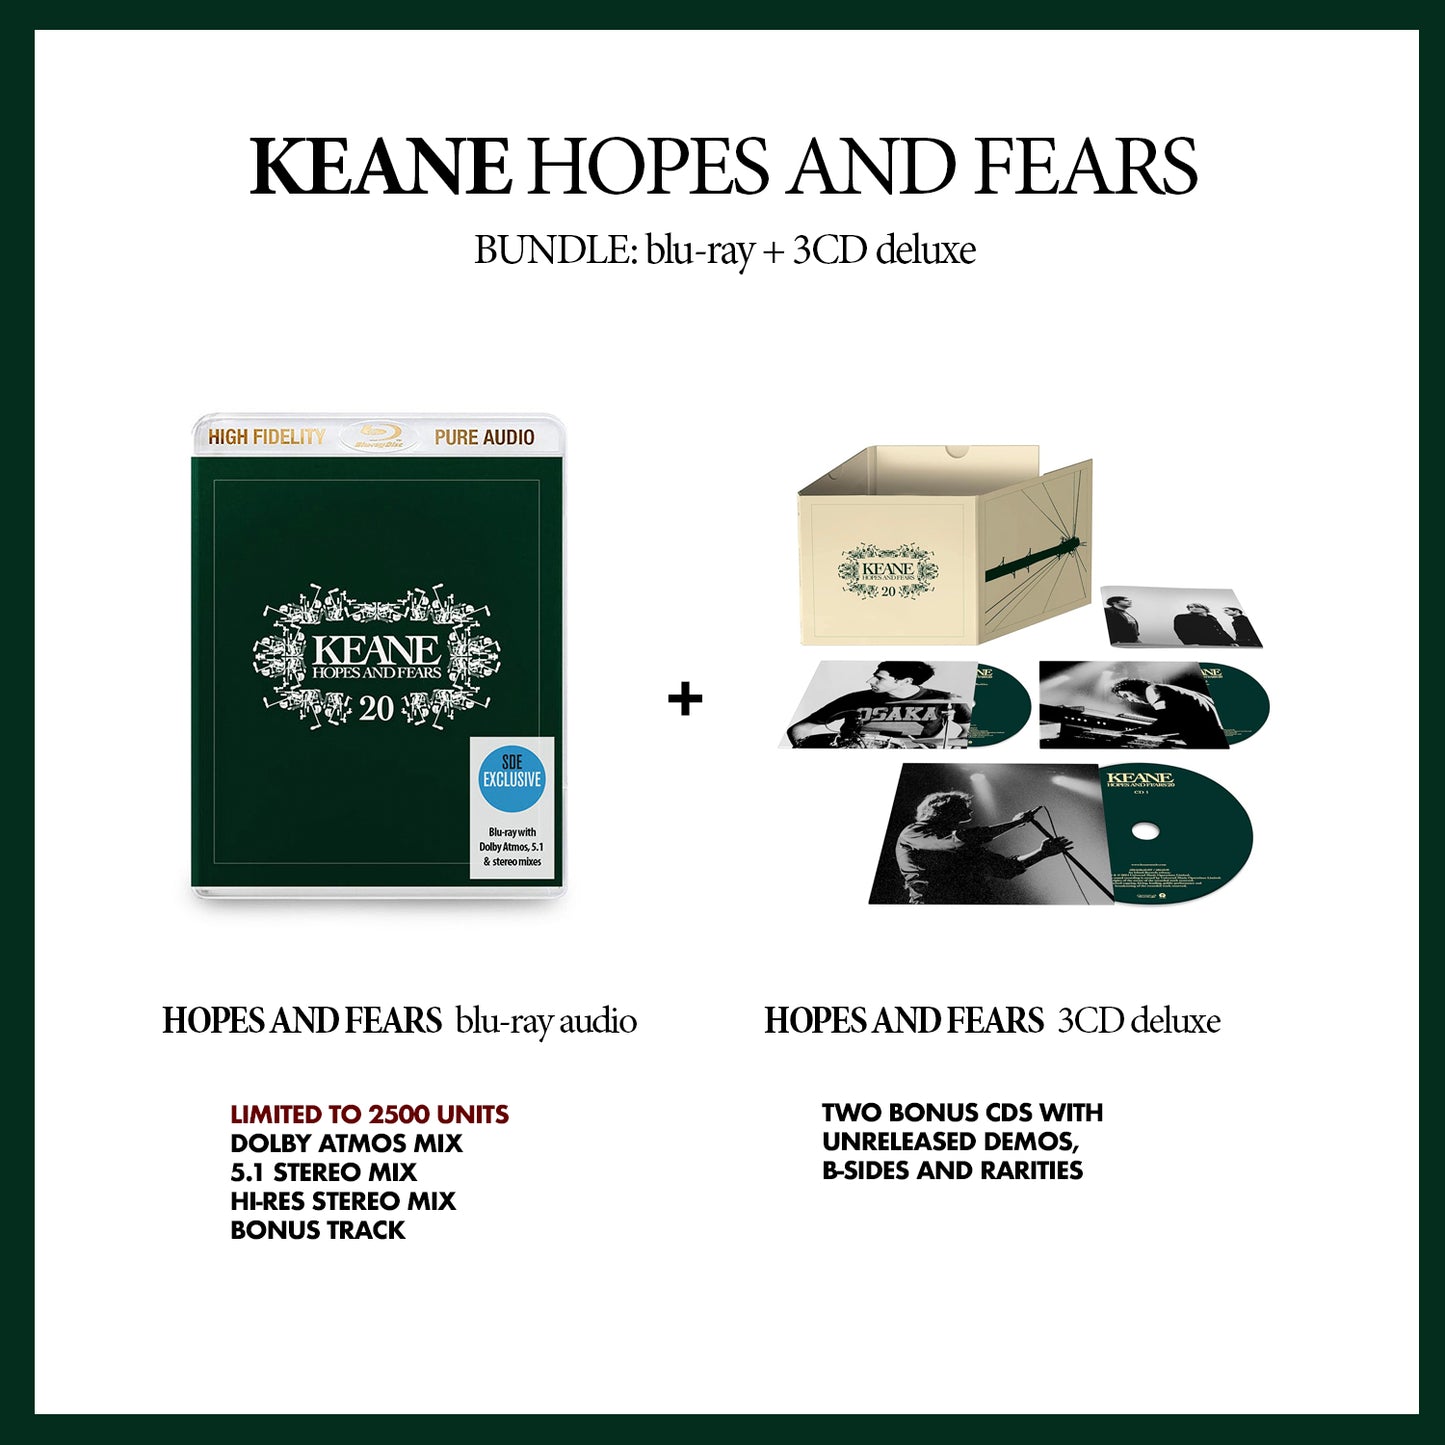 Keane / Hopes and Fears BUNDLE: blu-ray + 3CD deluxe